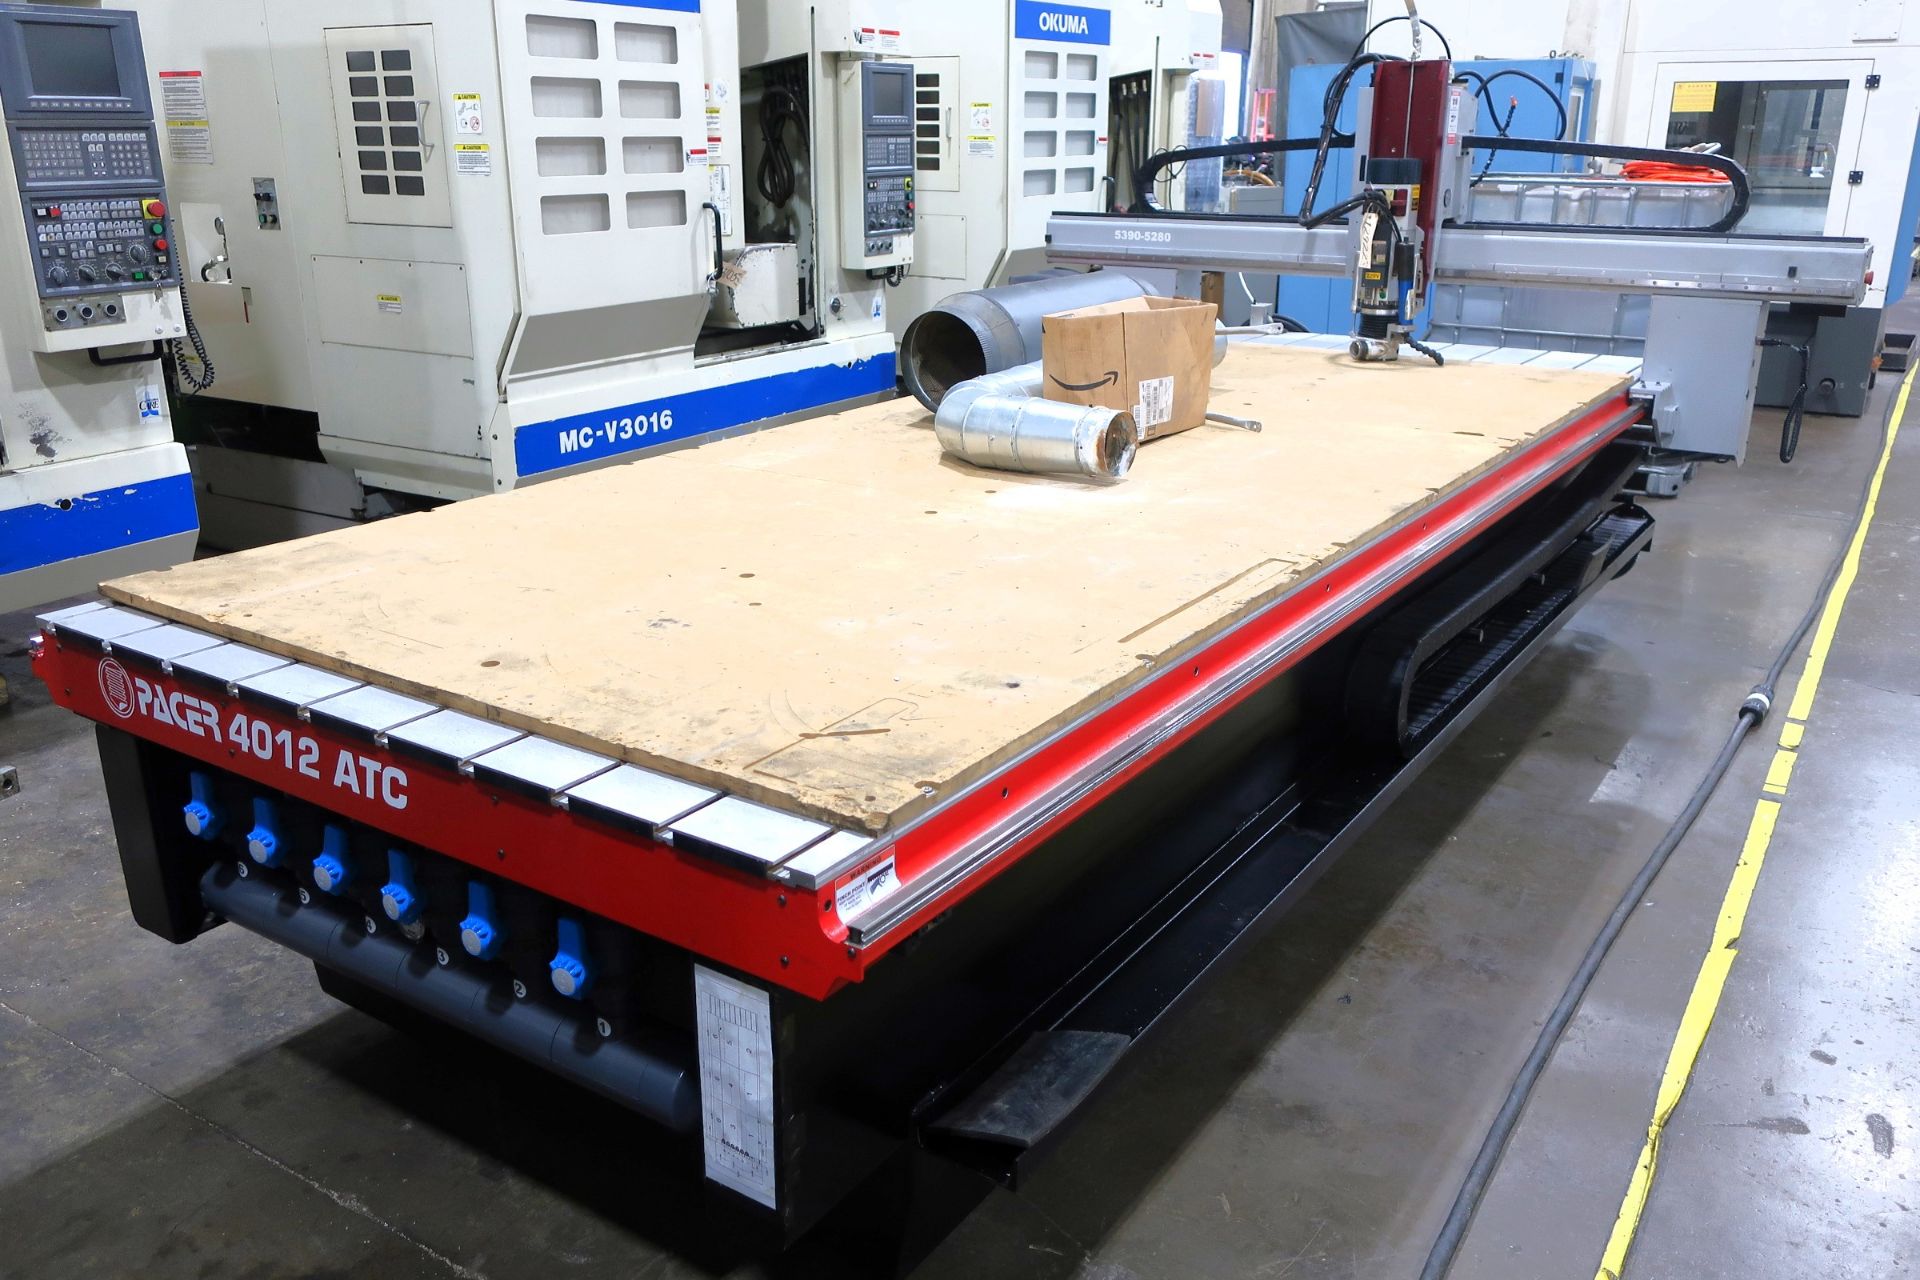 5' X 12' AXYZ PACER 4012 ATC CNC ROUTER, S/N 5390-5280, NEW 2015